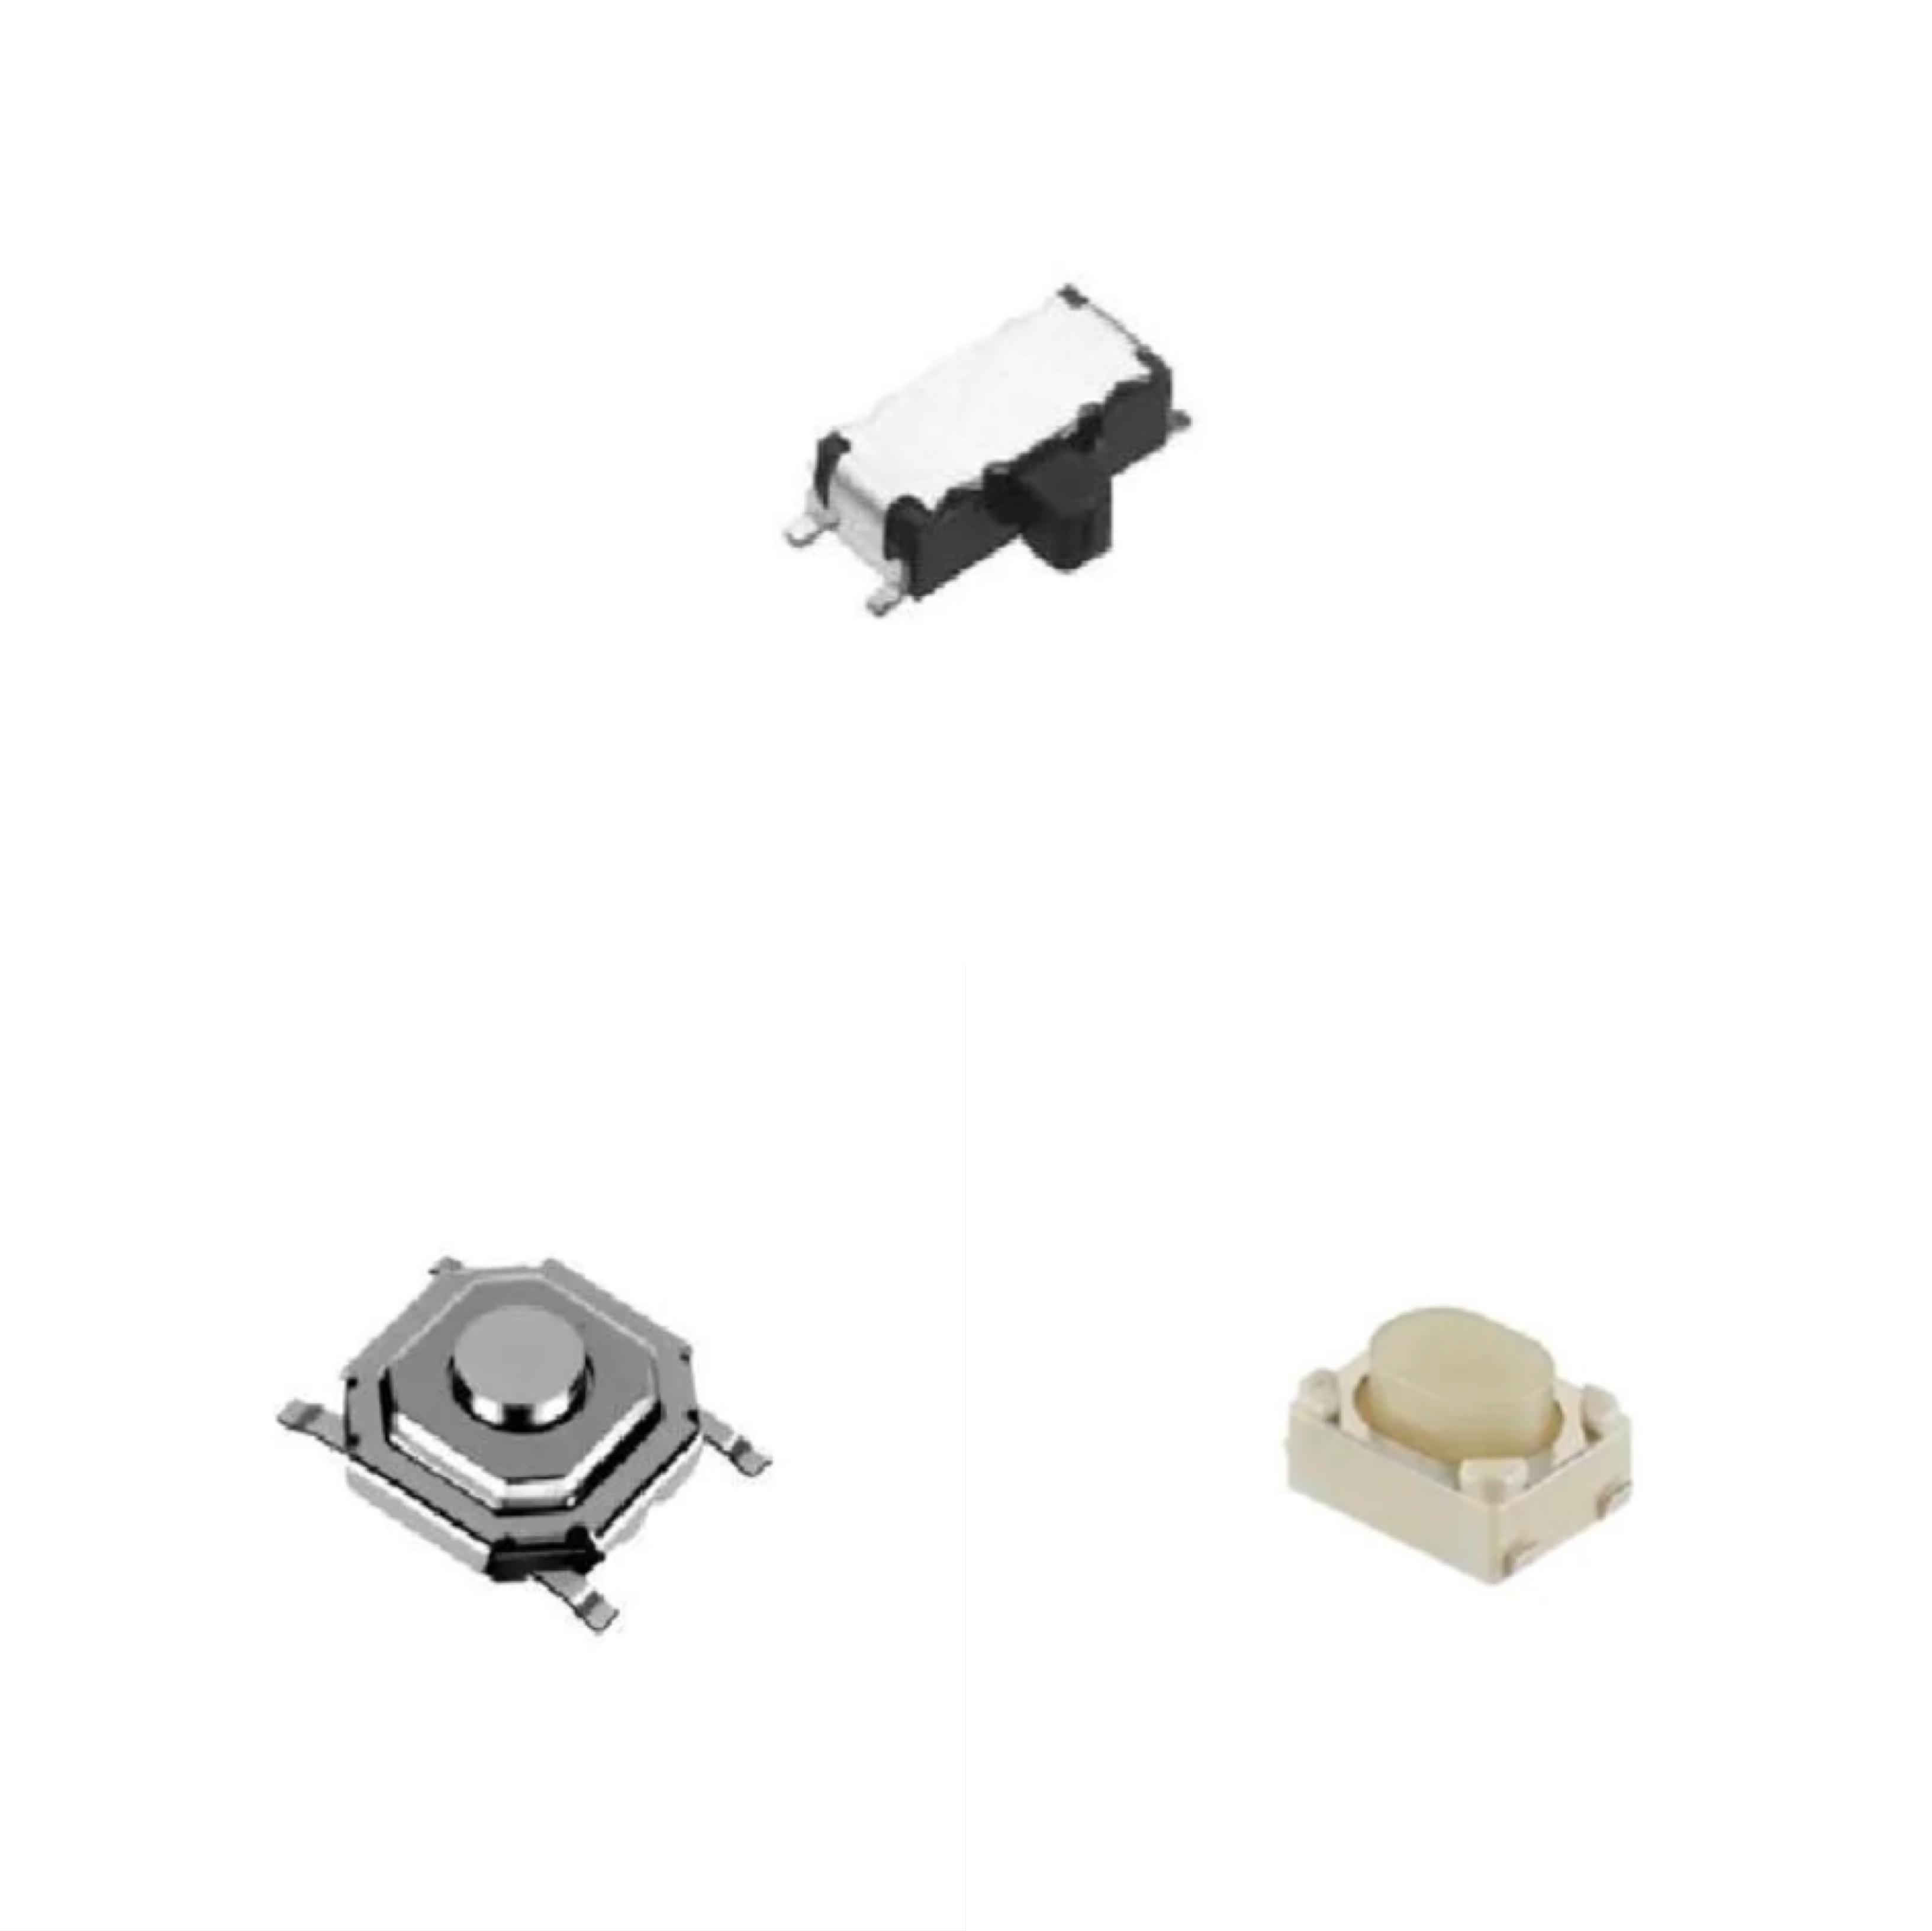 Wholesale Price China Speakers - SKHHAMA010 6x6x5 1.57N SPST 50mA   12VDC Vertical Round Button TThrough Hole Tactile Switches RoHS – Ronghua